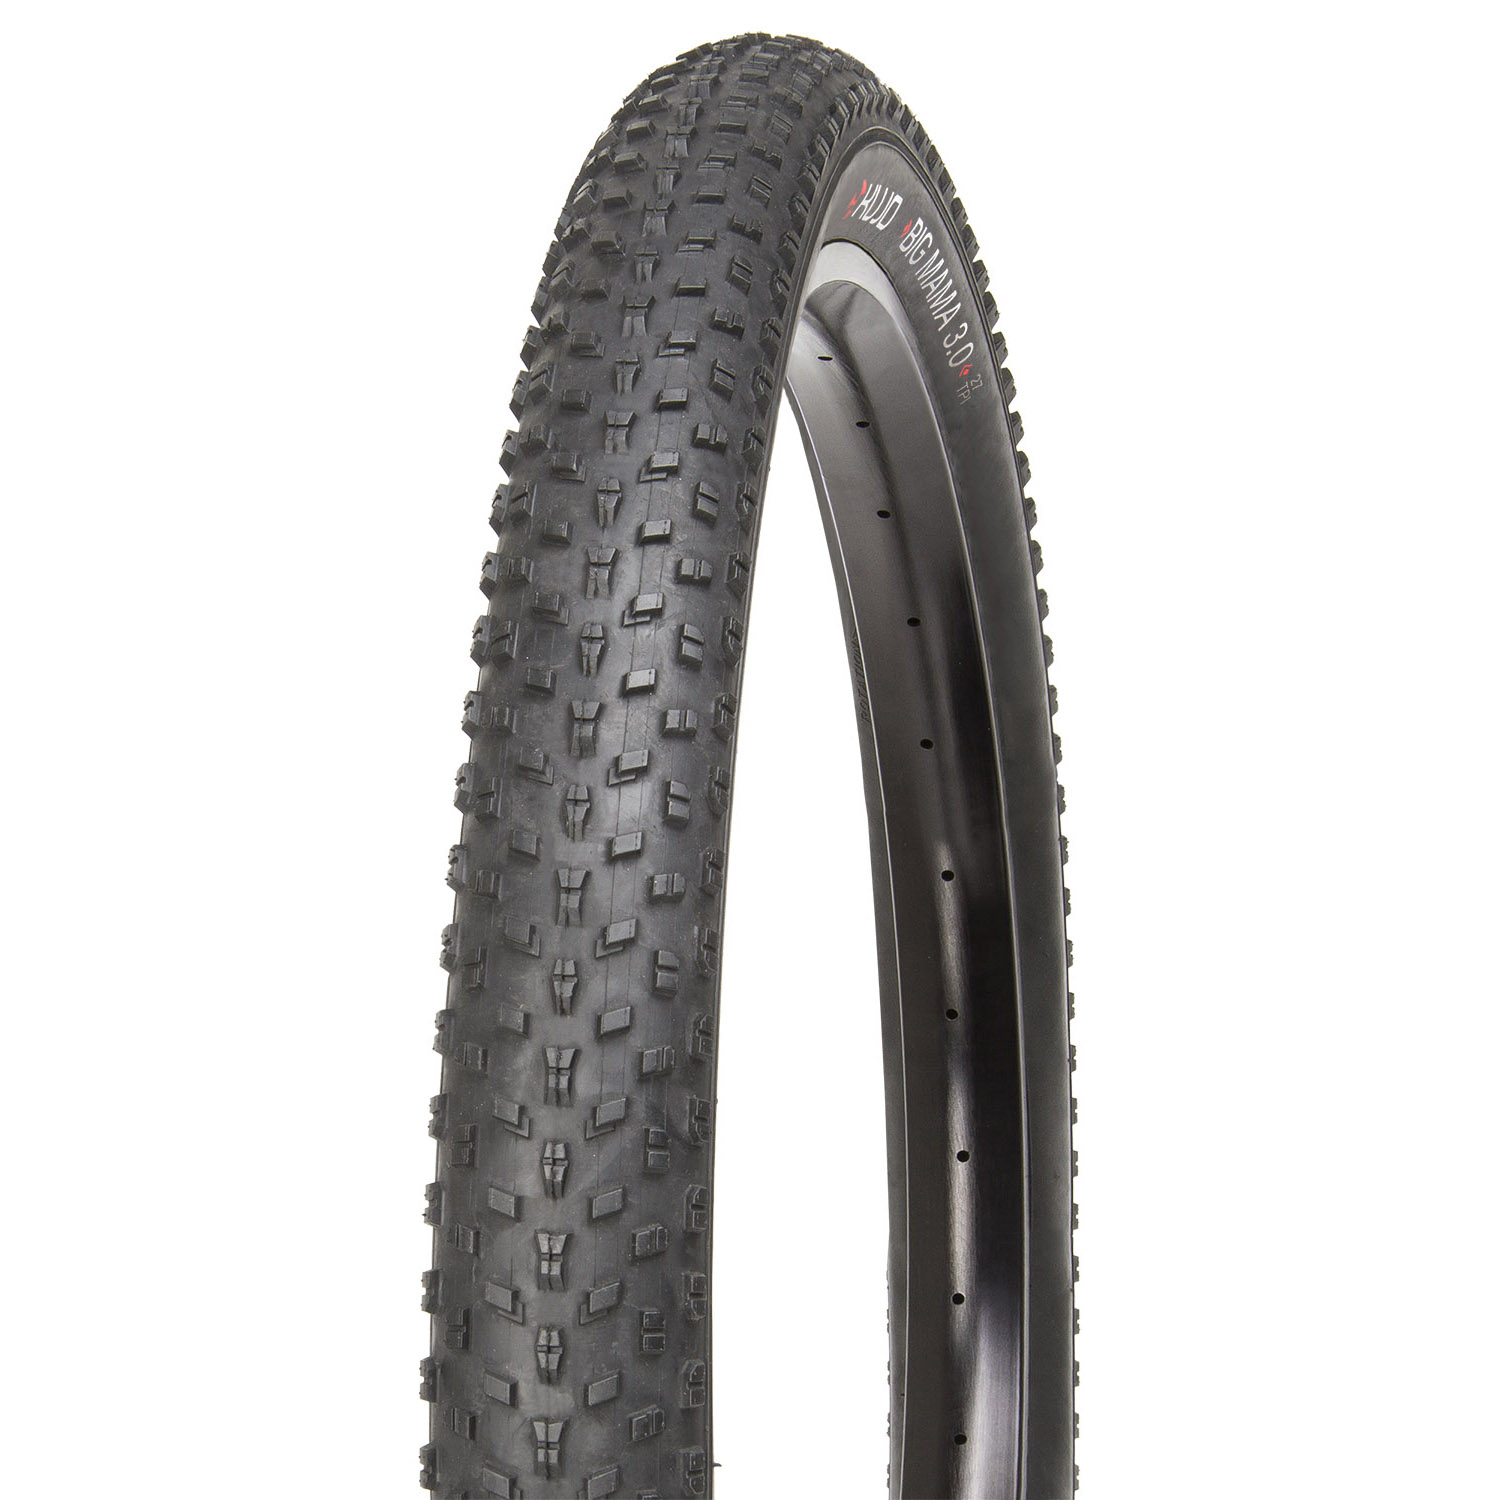 558127 KUJO Big Mama 27.5×3.0″ Clincher 60 TPI – AVAILABLE IN SELECTED BIKE SHOP